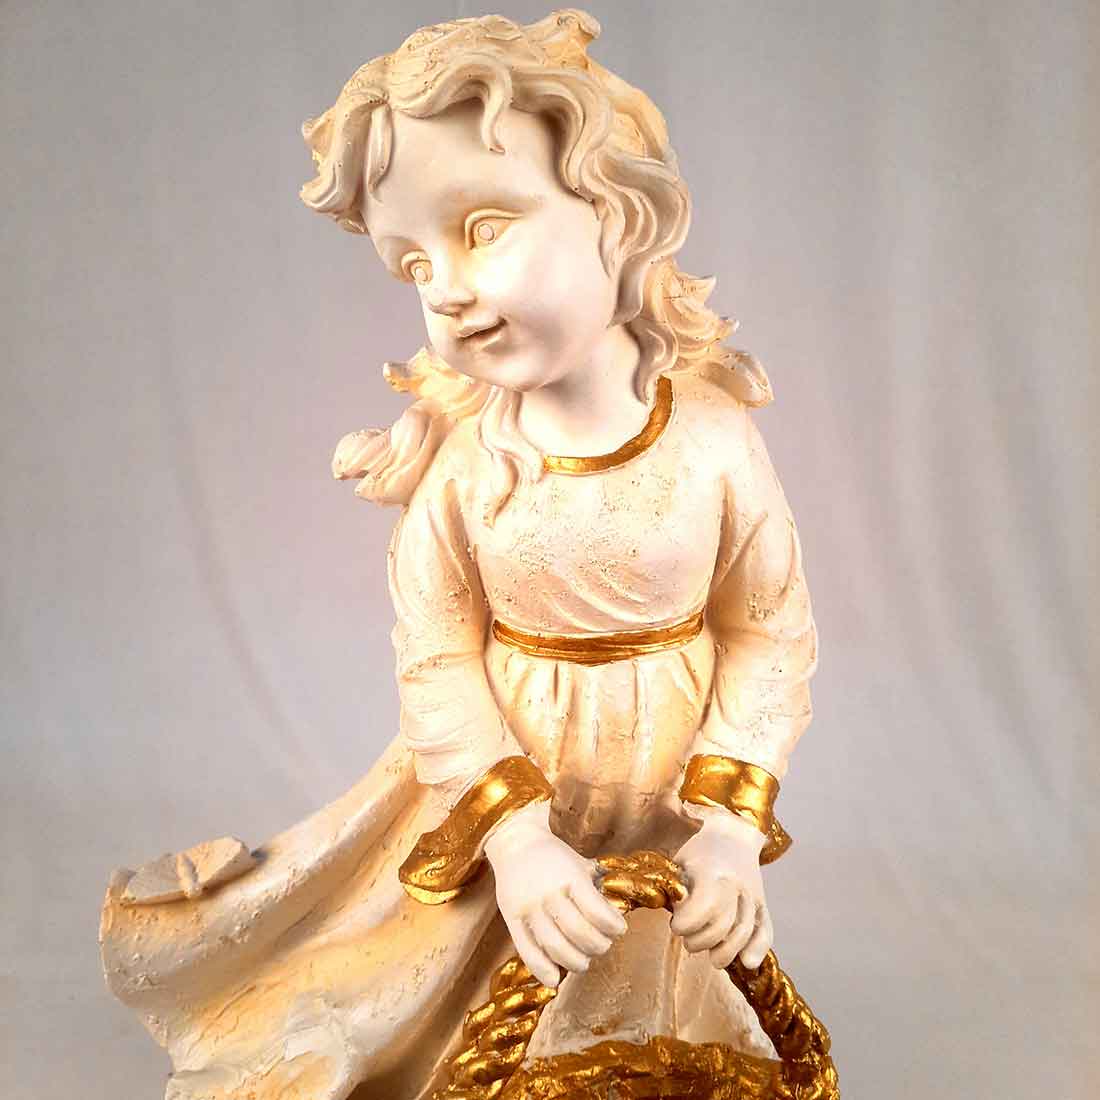 Lady with Basket Showpiece - Lady Figurines - For Table Decor & Living Room - 17 inch - ApkaMart